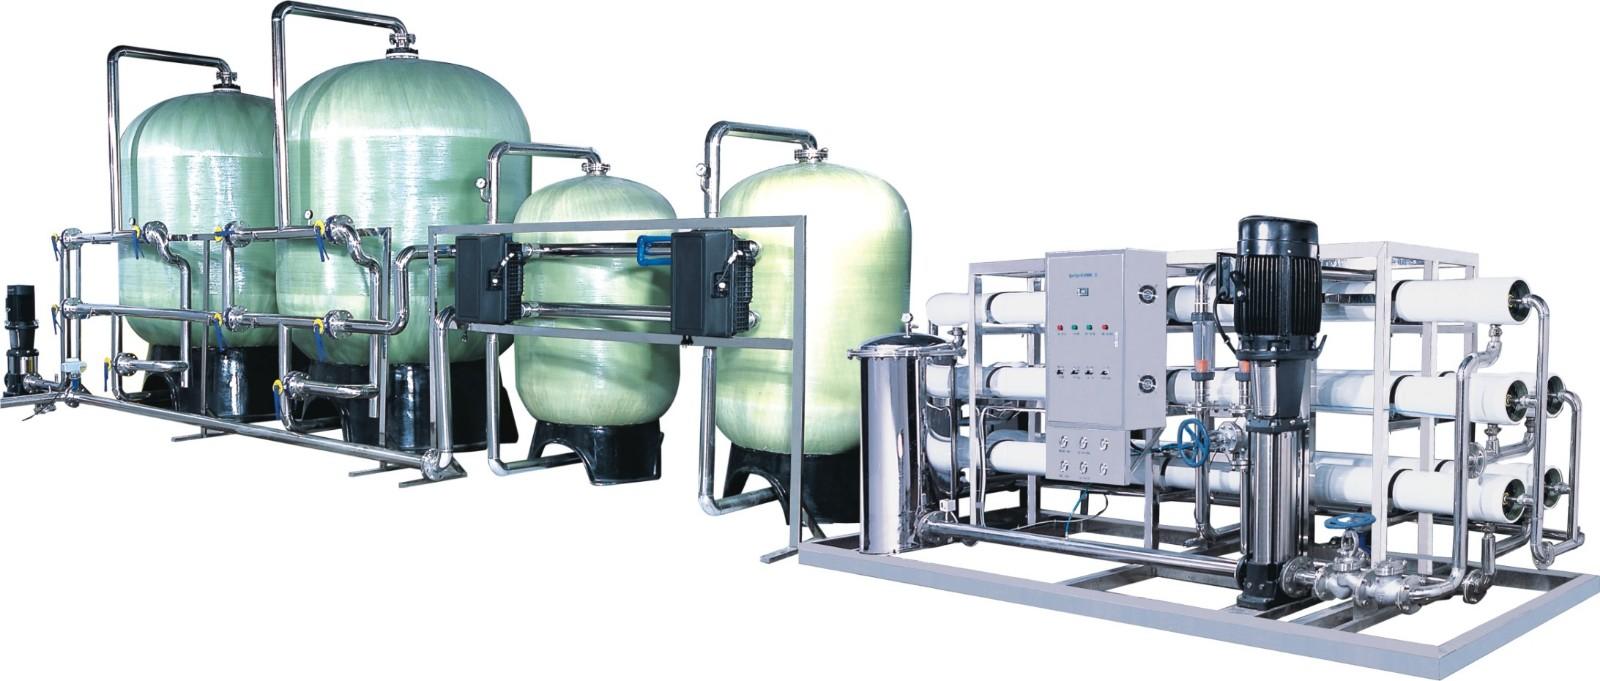 300l1000lh water treatment equipment for sale wholesaler trader for water purification EcoPura-1